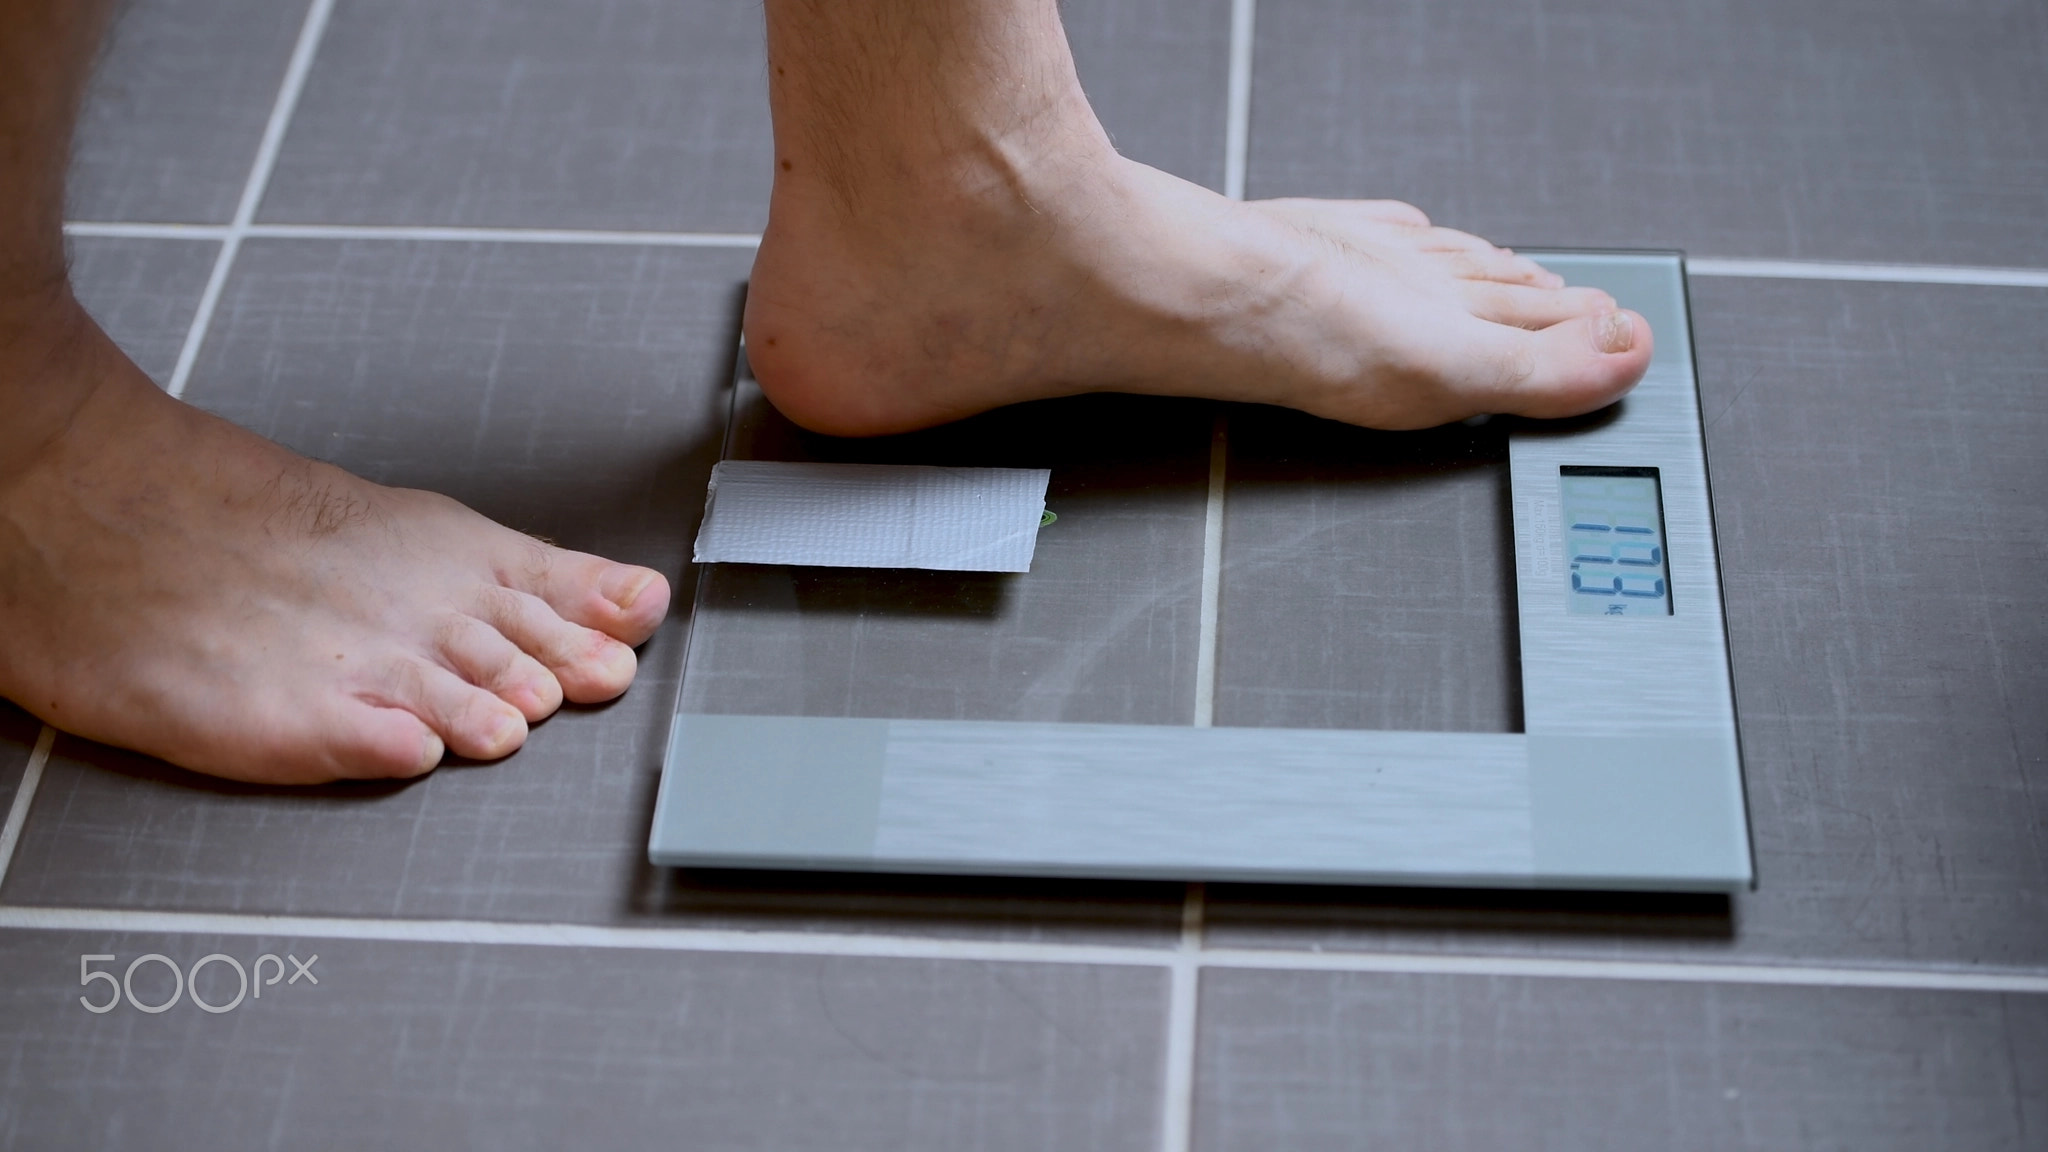 Male feet on glass scales, men's diet, body weight